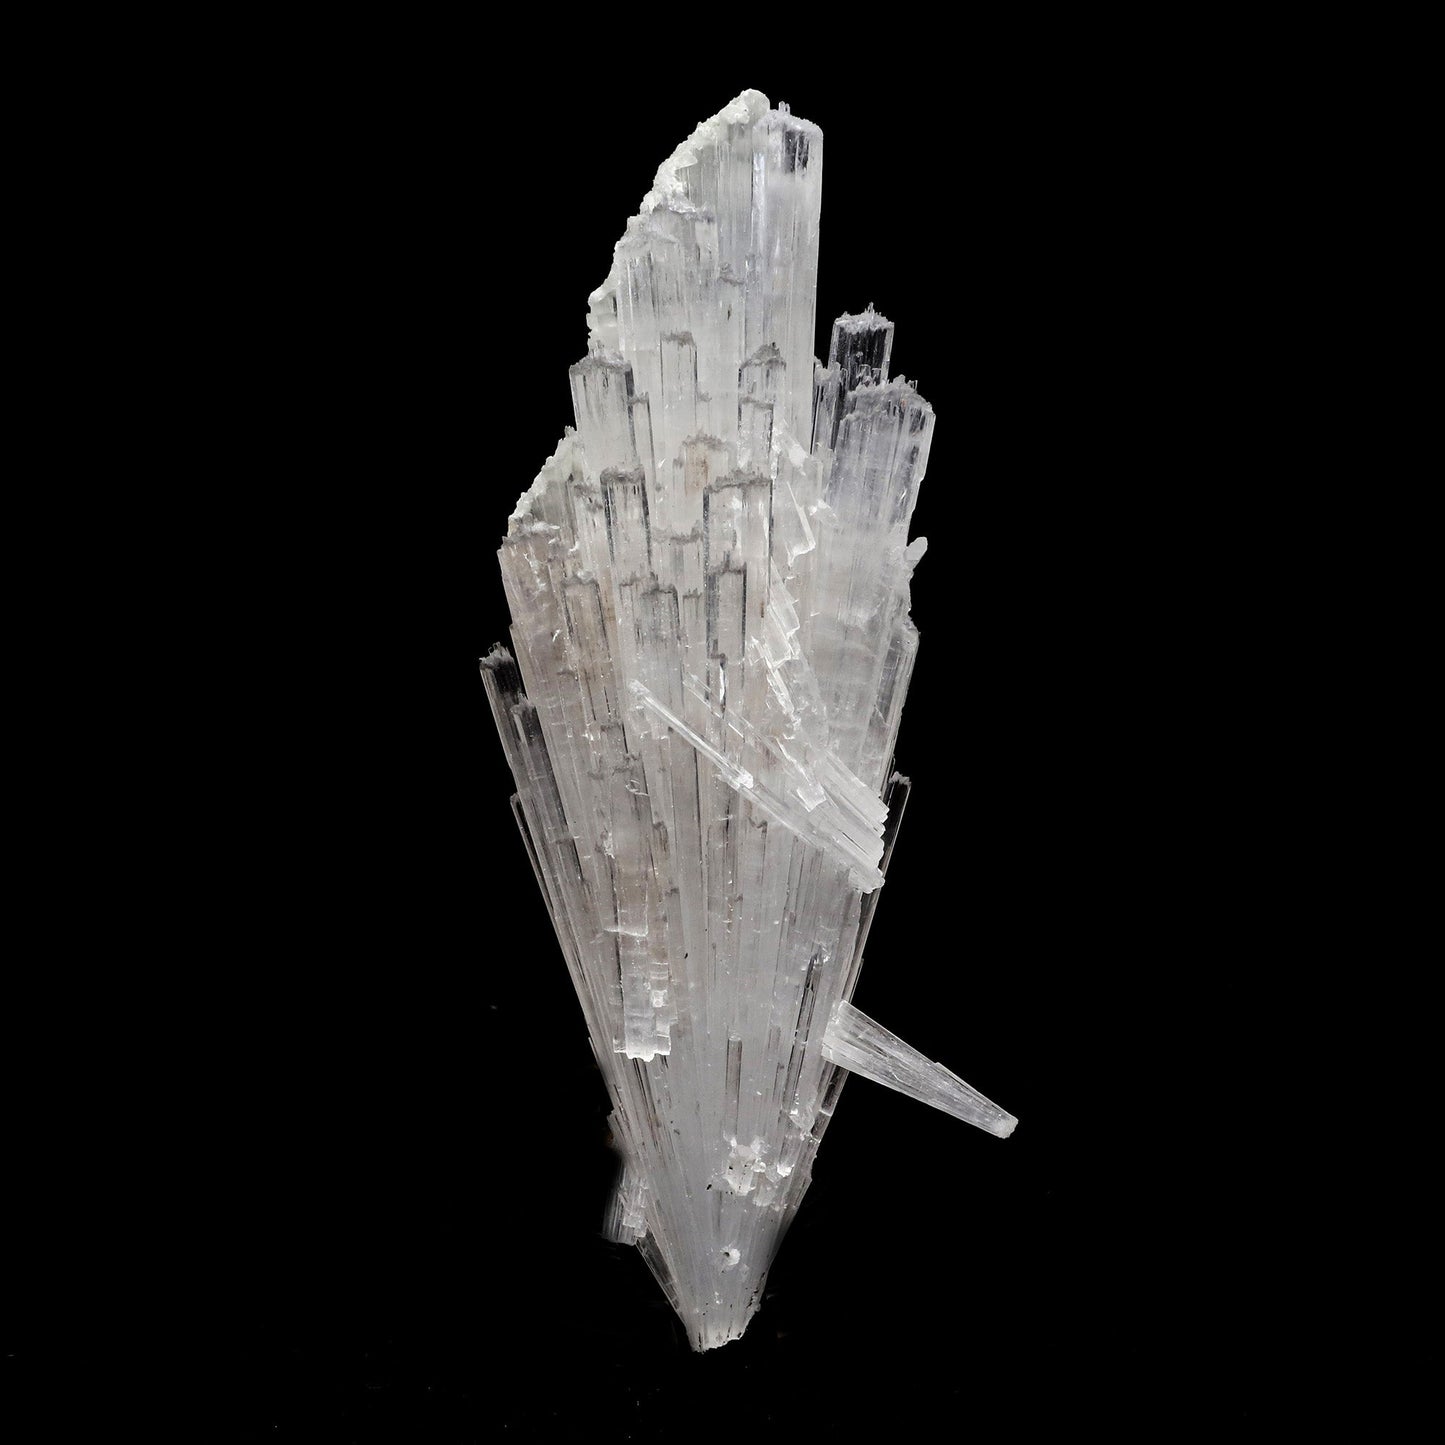 Scolecite Accular Spray Natural Mineral Specimen # B 5279  https://www.superbminerals.us/products/scolecite-accular-spray-natural-mineral-specimen-b-5279  Features: This specimen features a large, radial formation of colorless, transparent, lustrous acicular Scolecite crystals on peach-colored Stilbite. Primary Mineral(s): Scolecite Secondary Mineral(s): N/AMatrix: N/A 6 Inch x 2.5 InchWeight : 145 GmsLocality: Aurangabad, Maharashtra, India Year of Discovery: 2021